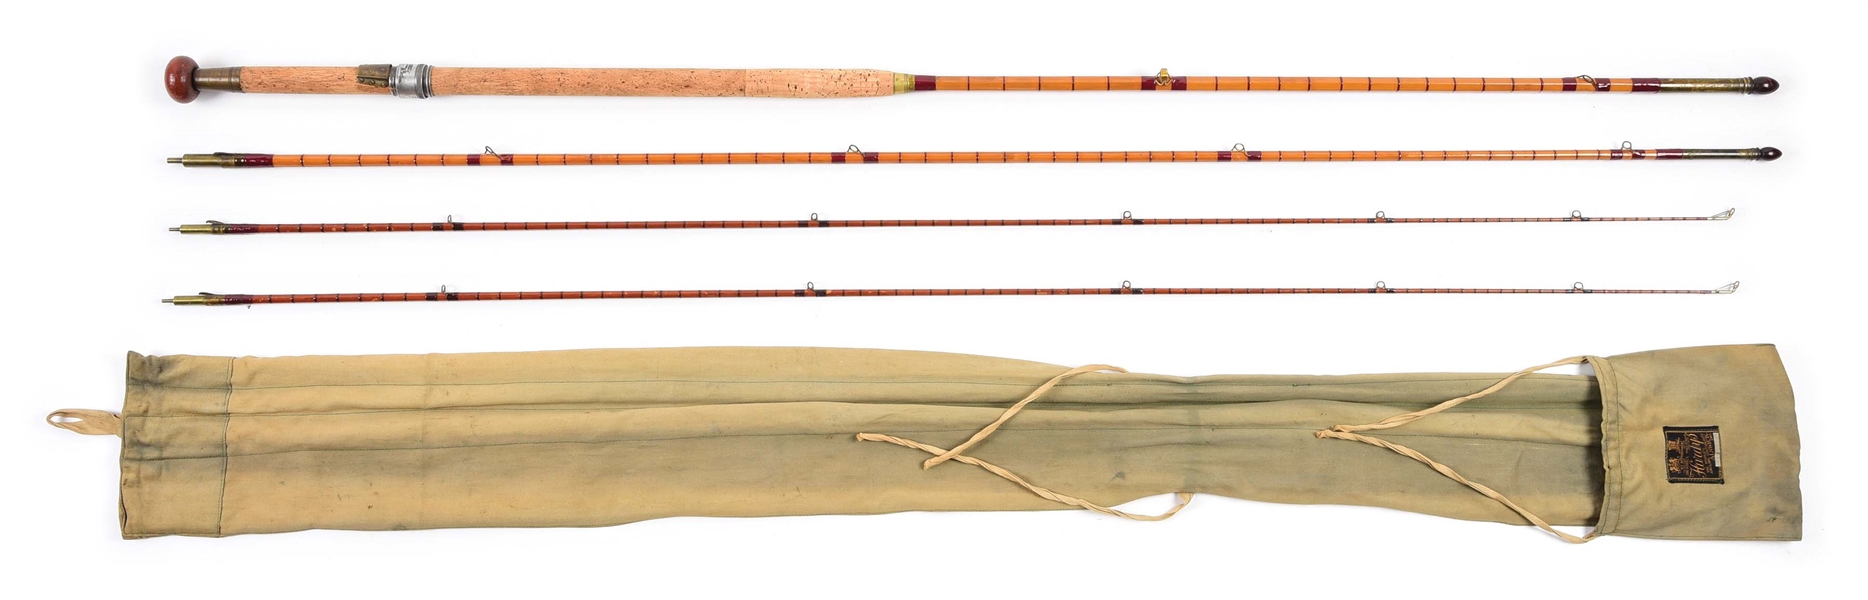 FISHING RODS WITH ACCESSORIES.